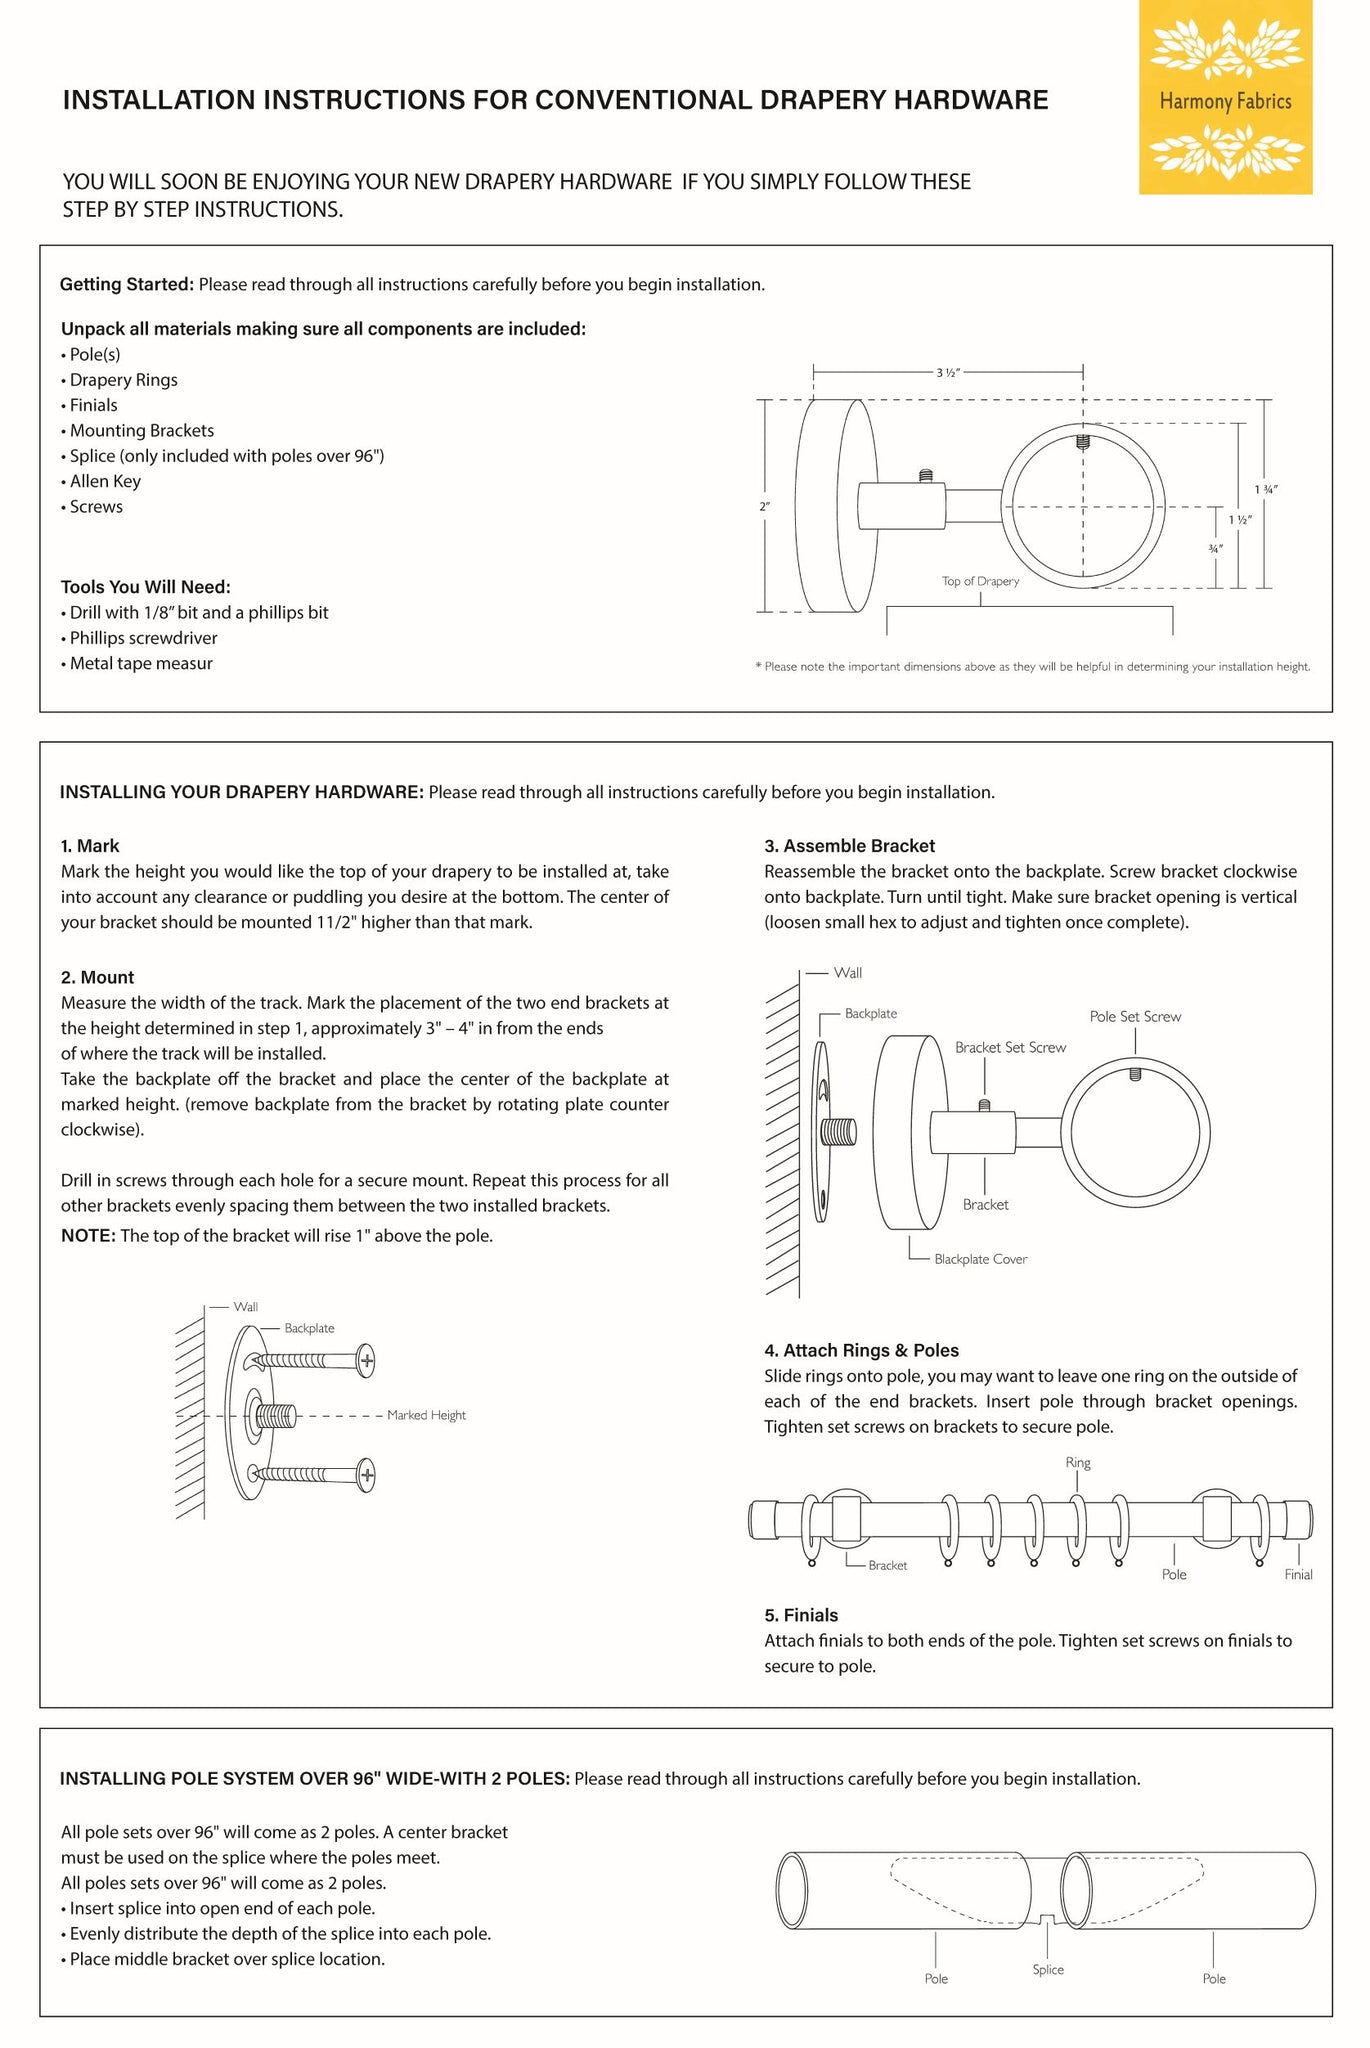 Conventional Drapery Hardware Installation Instructions